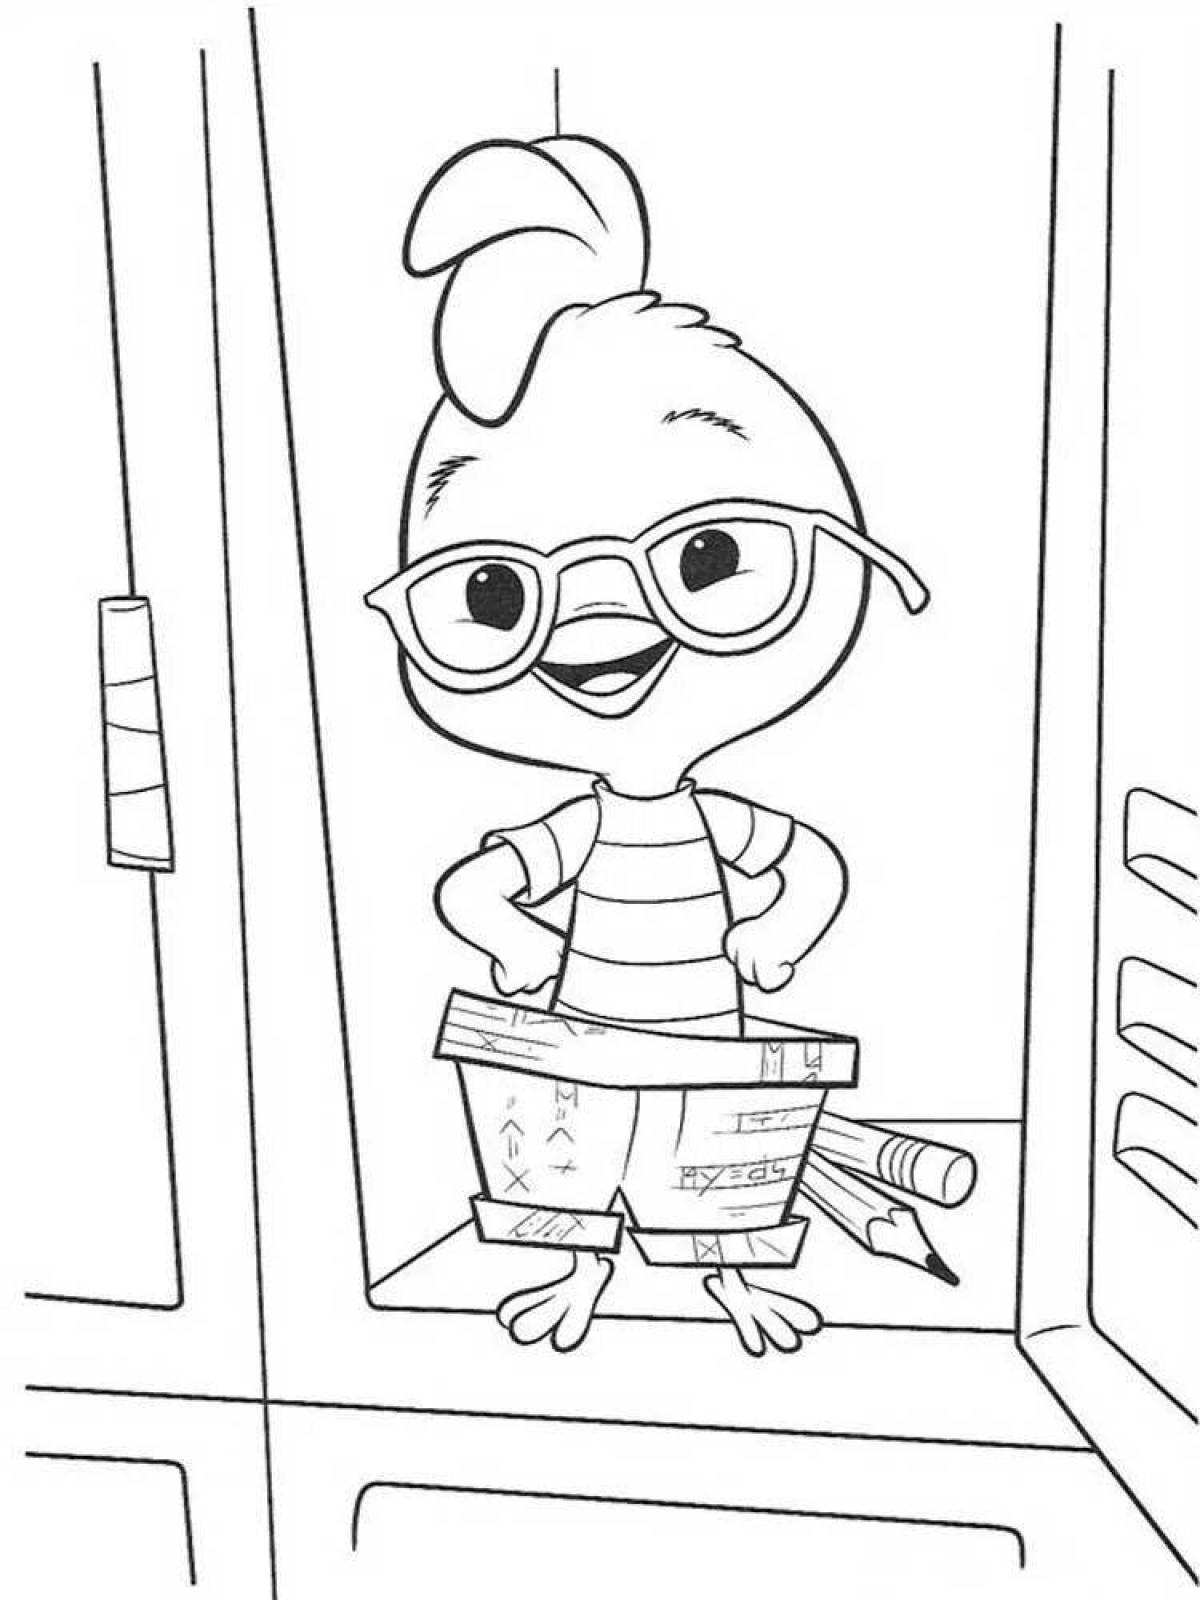 Adorable chick coloring page